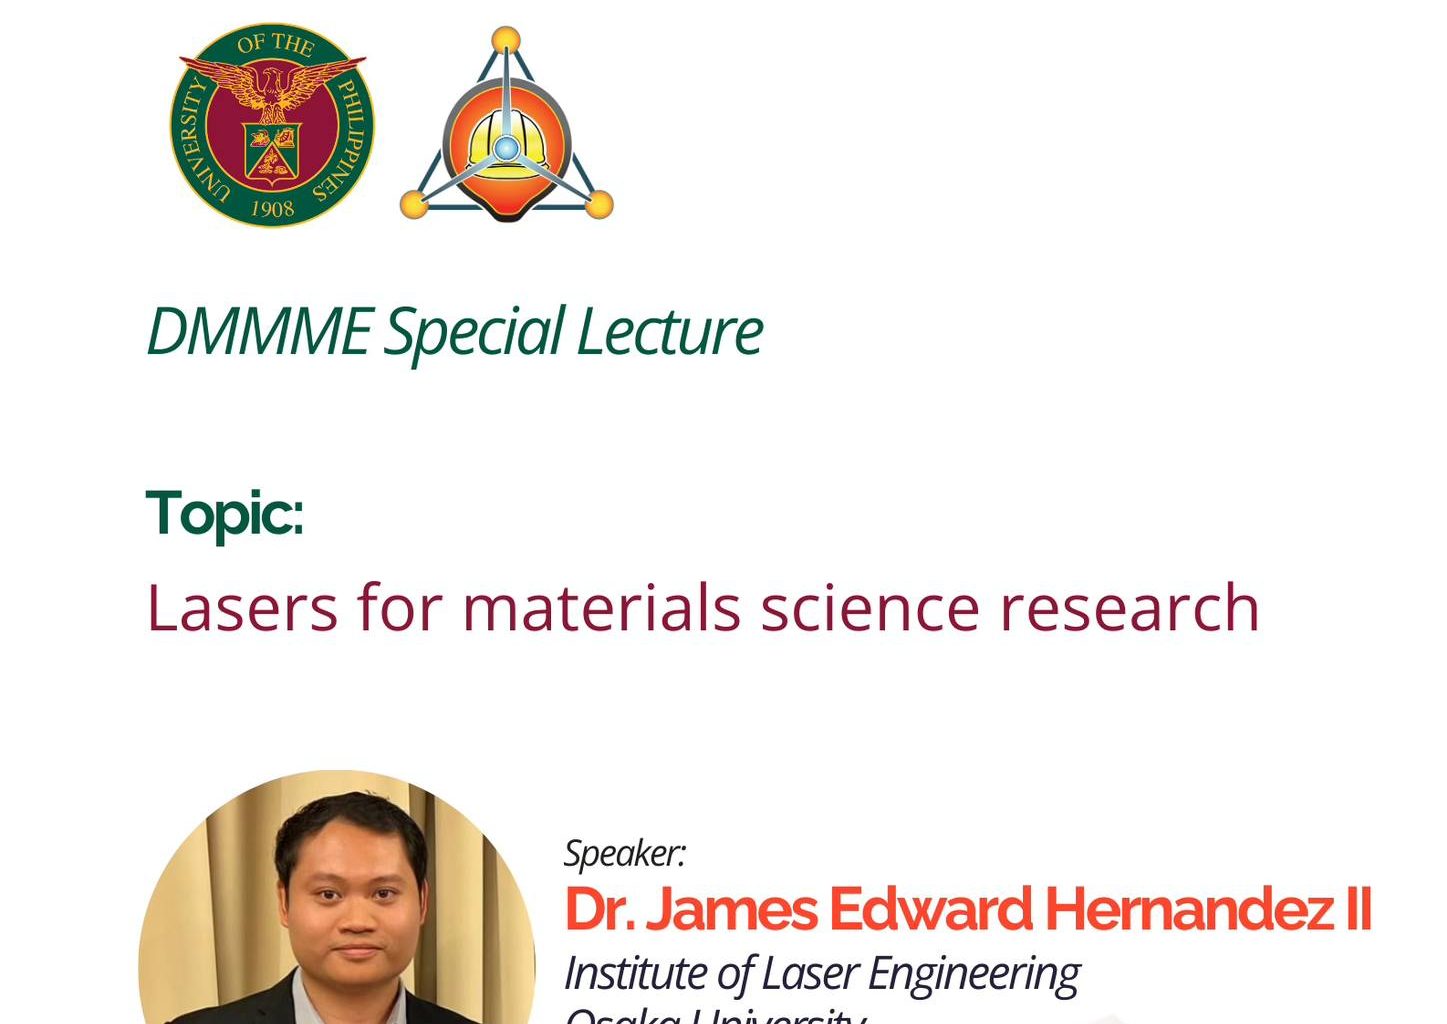 DMMME Special Lecture: Lasers for Materials Science Research